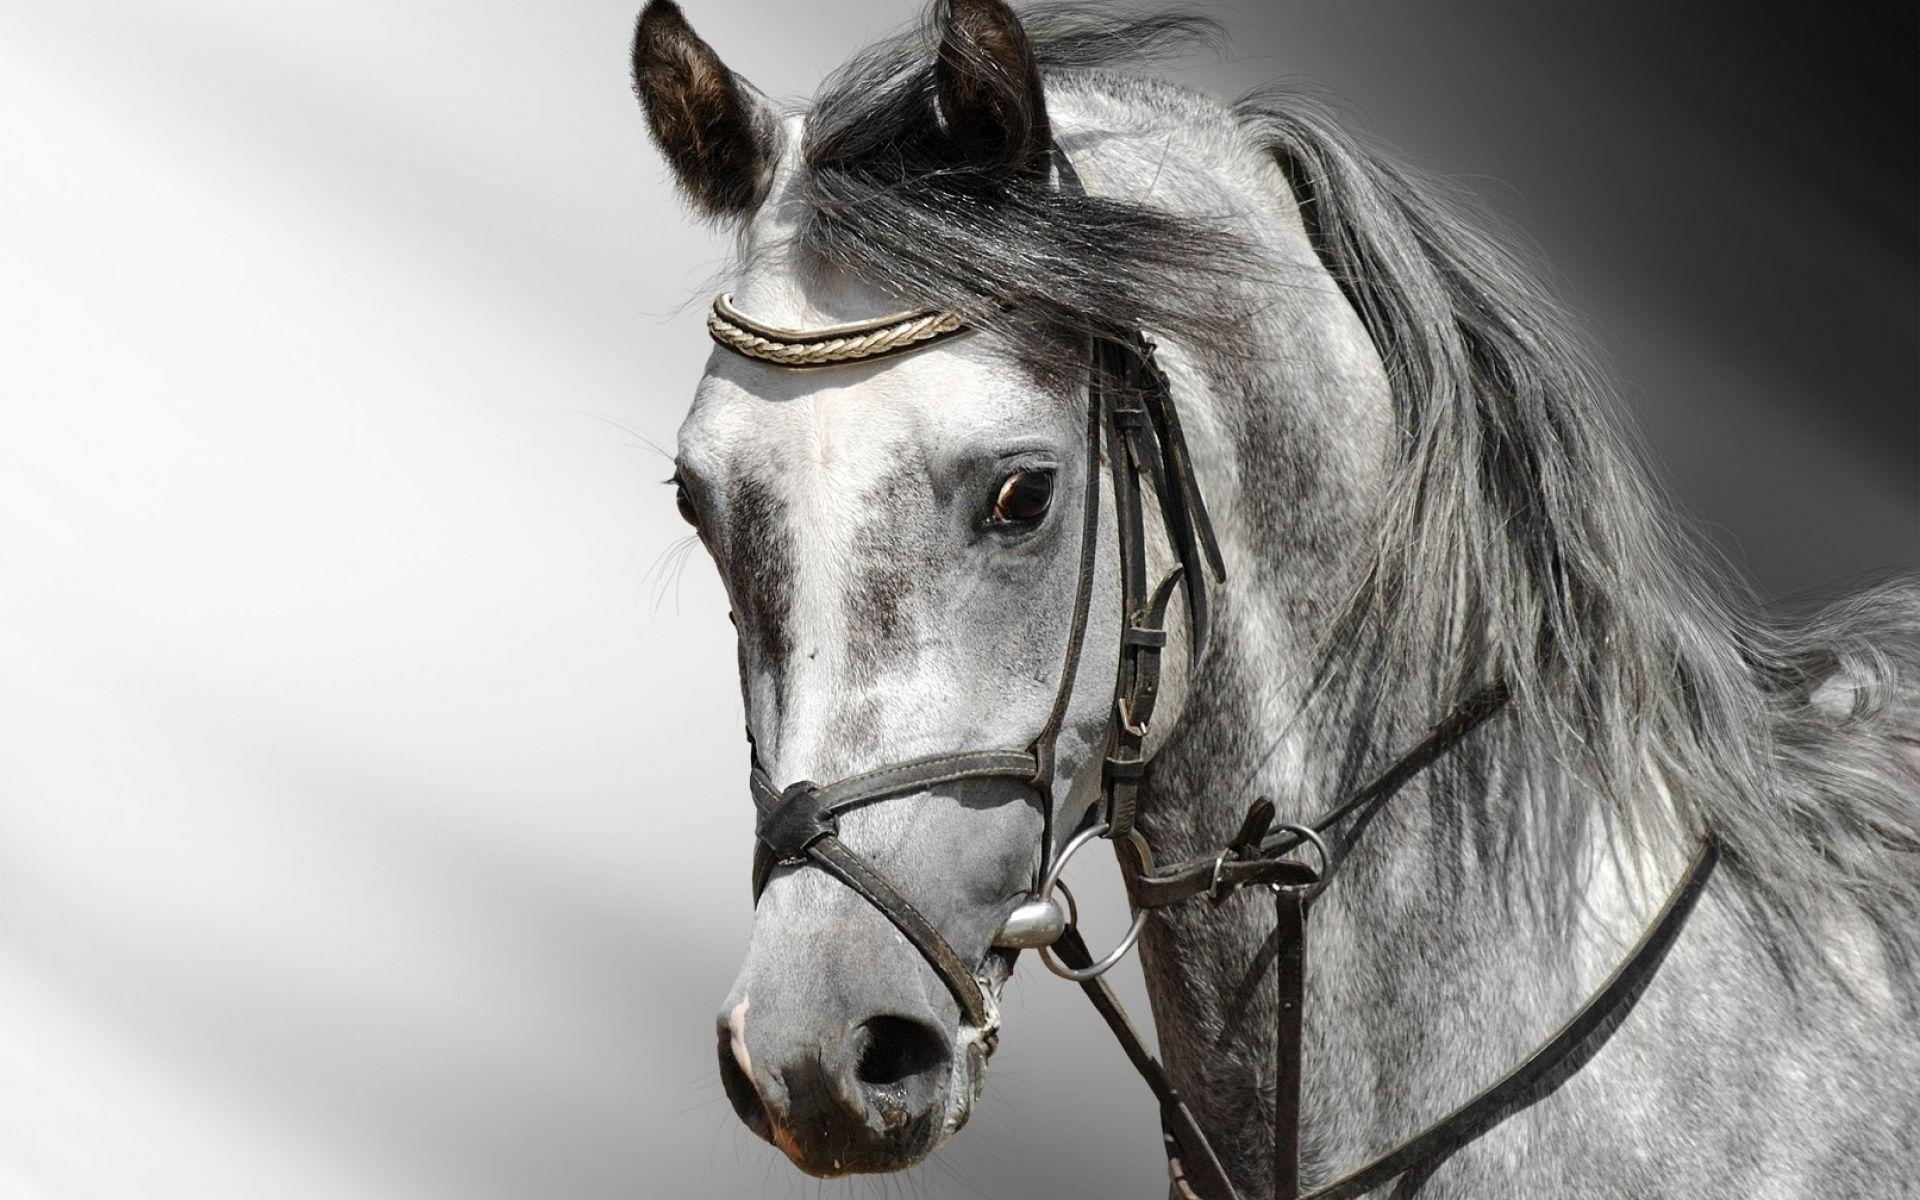 3D Black and White Horse Wallpaper. HD Animals and Birds Wallpaper for Mobile and Desktop